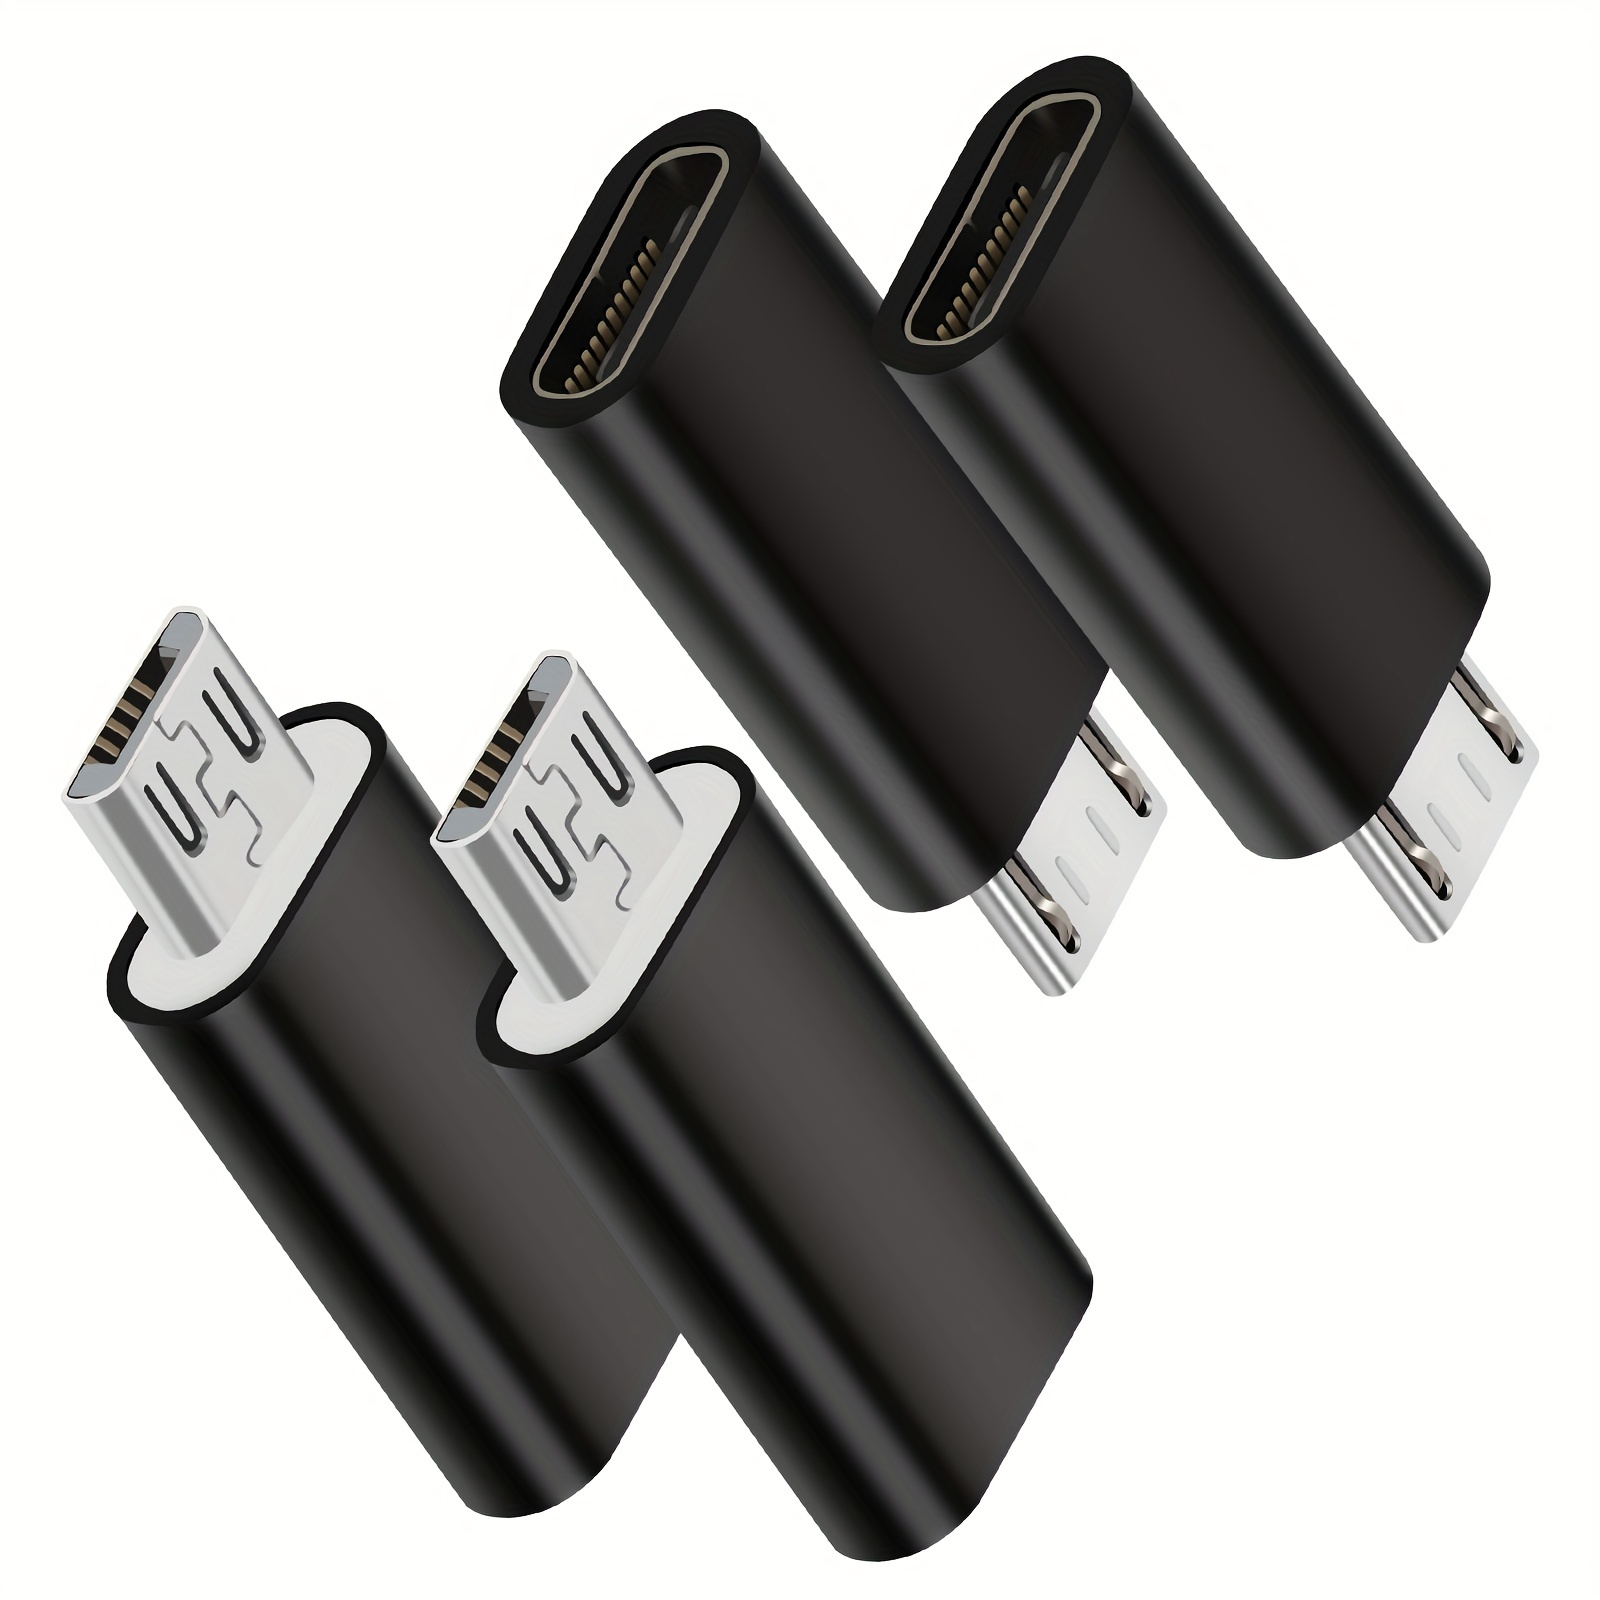 

Usb C To Micro Usb Adapter Pack Of 4 Type C Female To Micro Usb Male Convert Connector Support Charge & Data Sync Compatible With Galaxy S7 Edge S6 Nexus 5/6 And Micro Usb Devices (black)